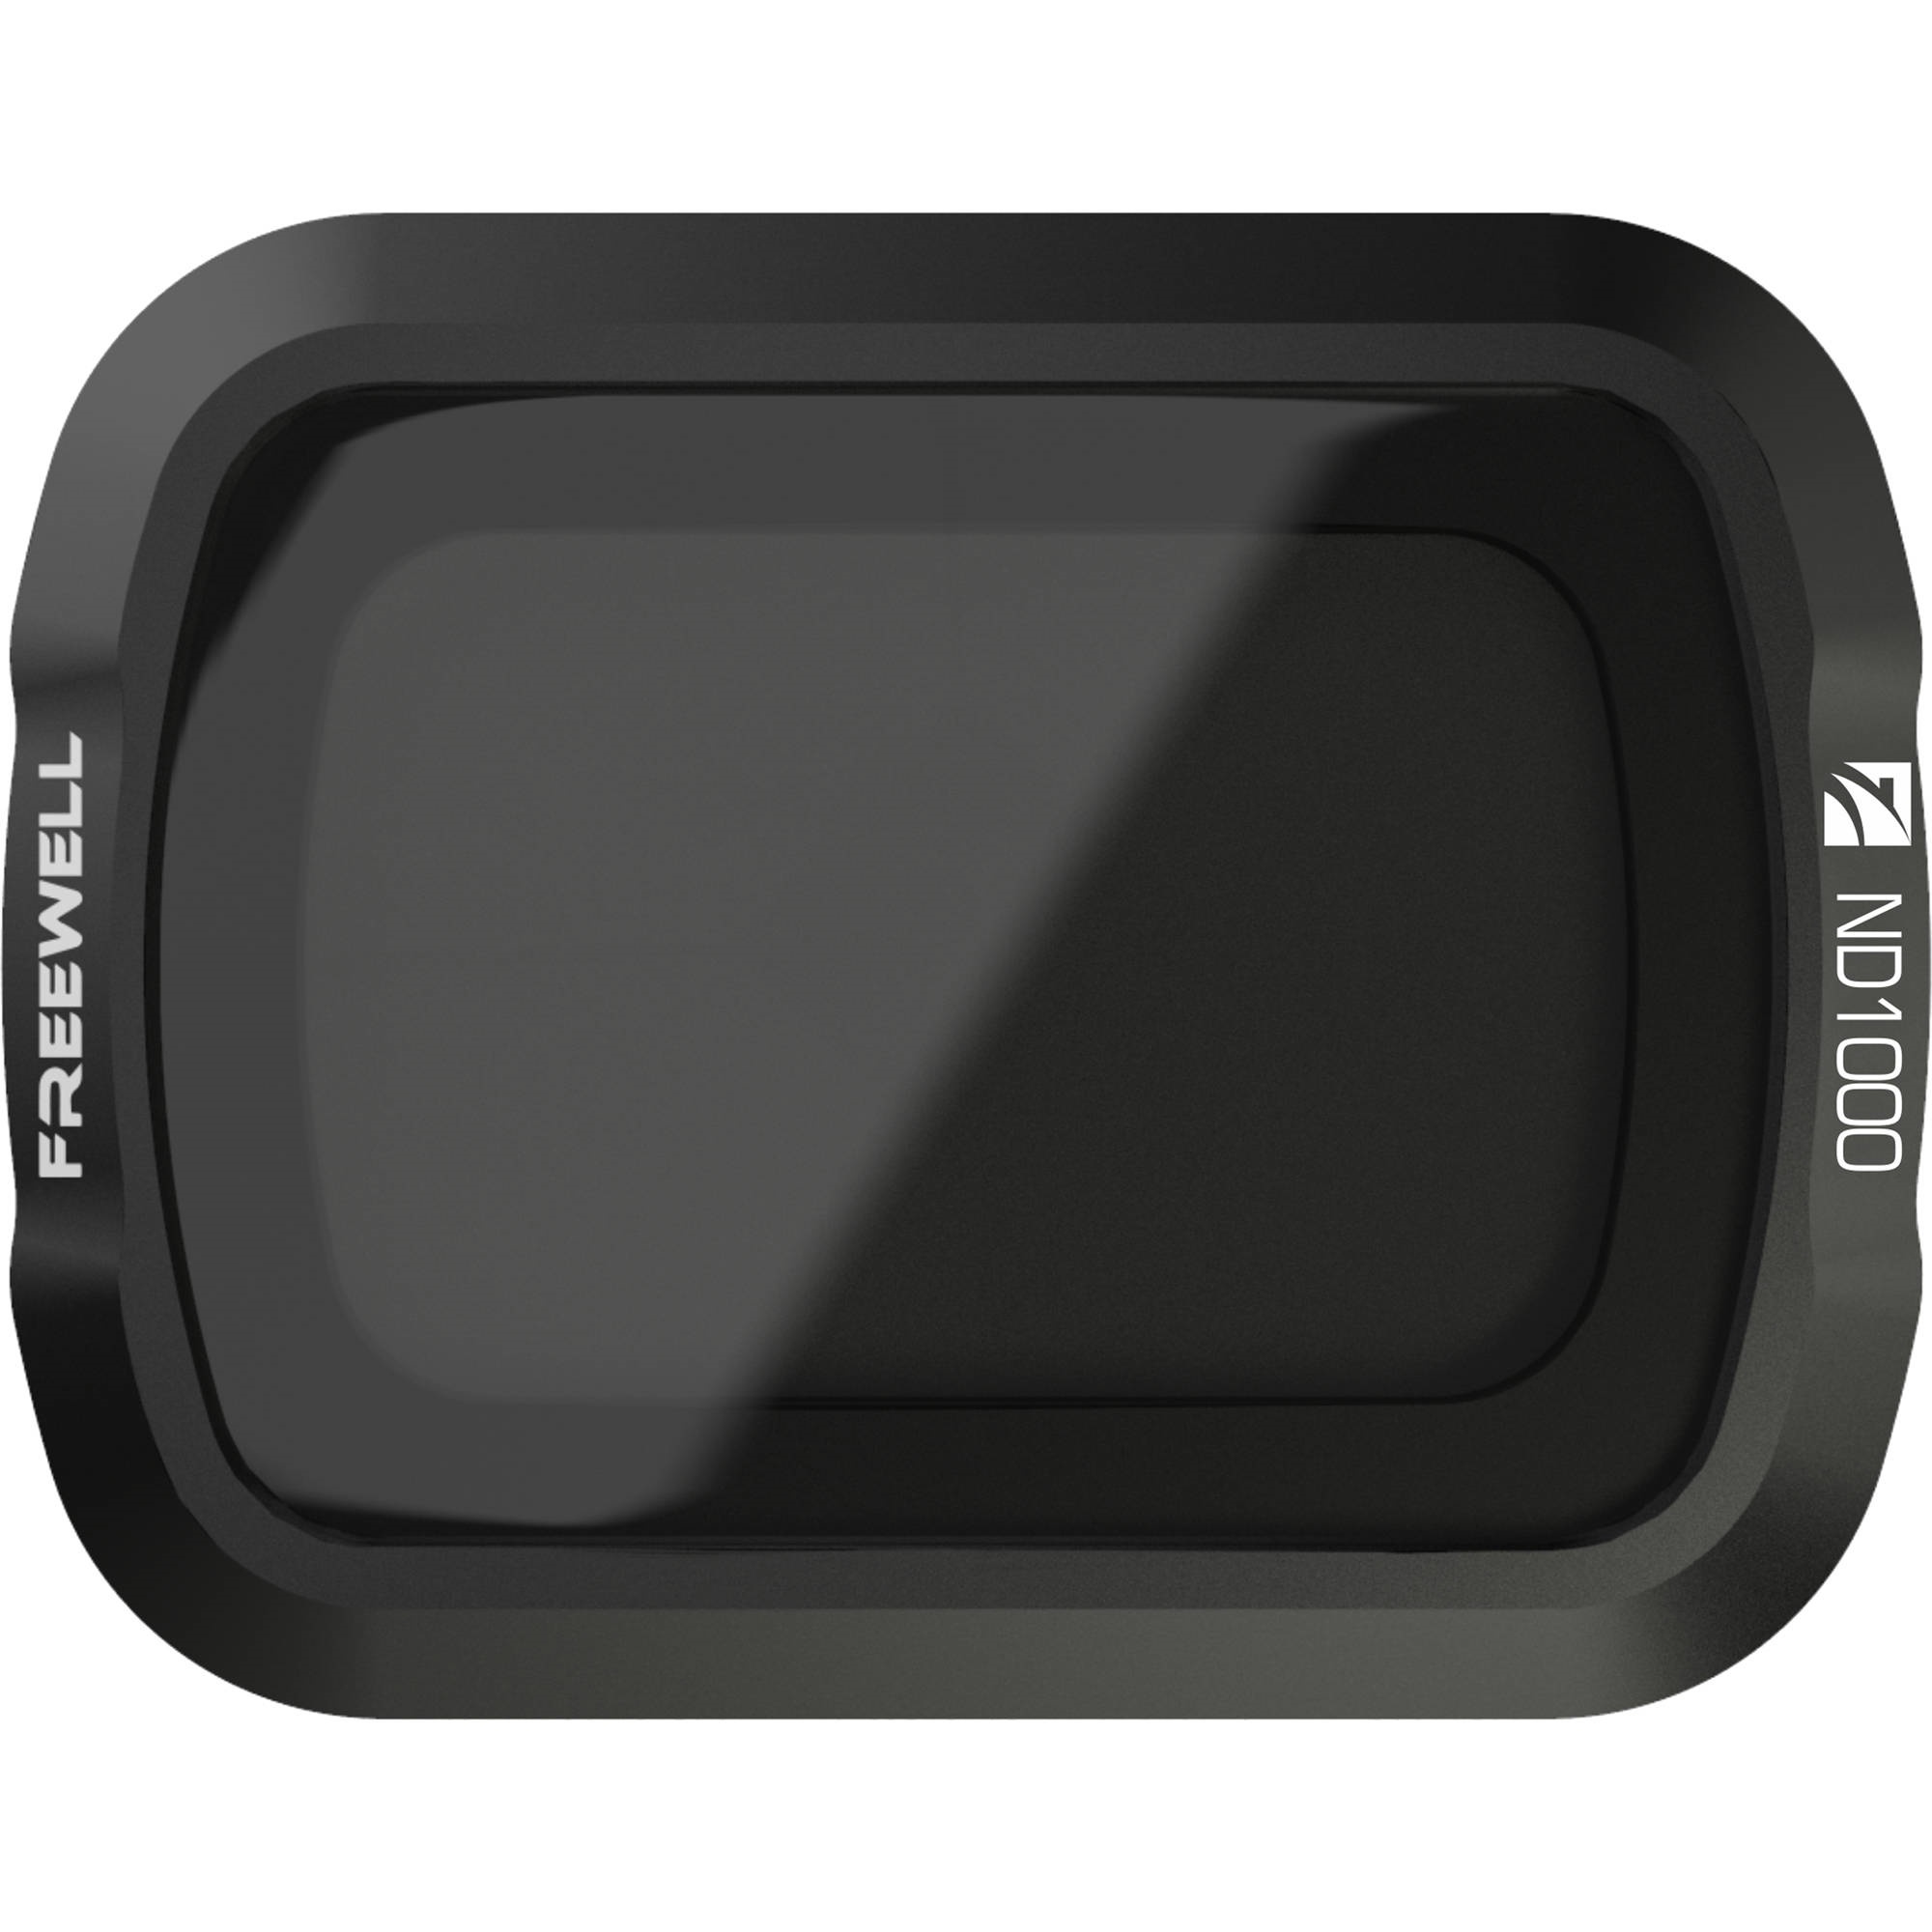 Freewell ND1000 Long-Exposure Filter for DJI Osmo Pocket/Pocket 2